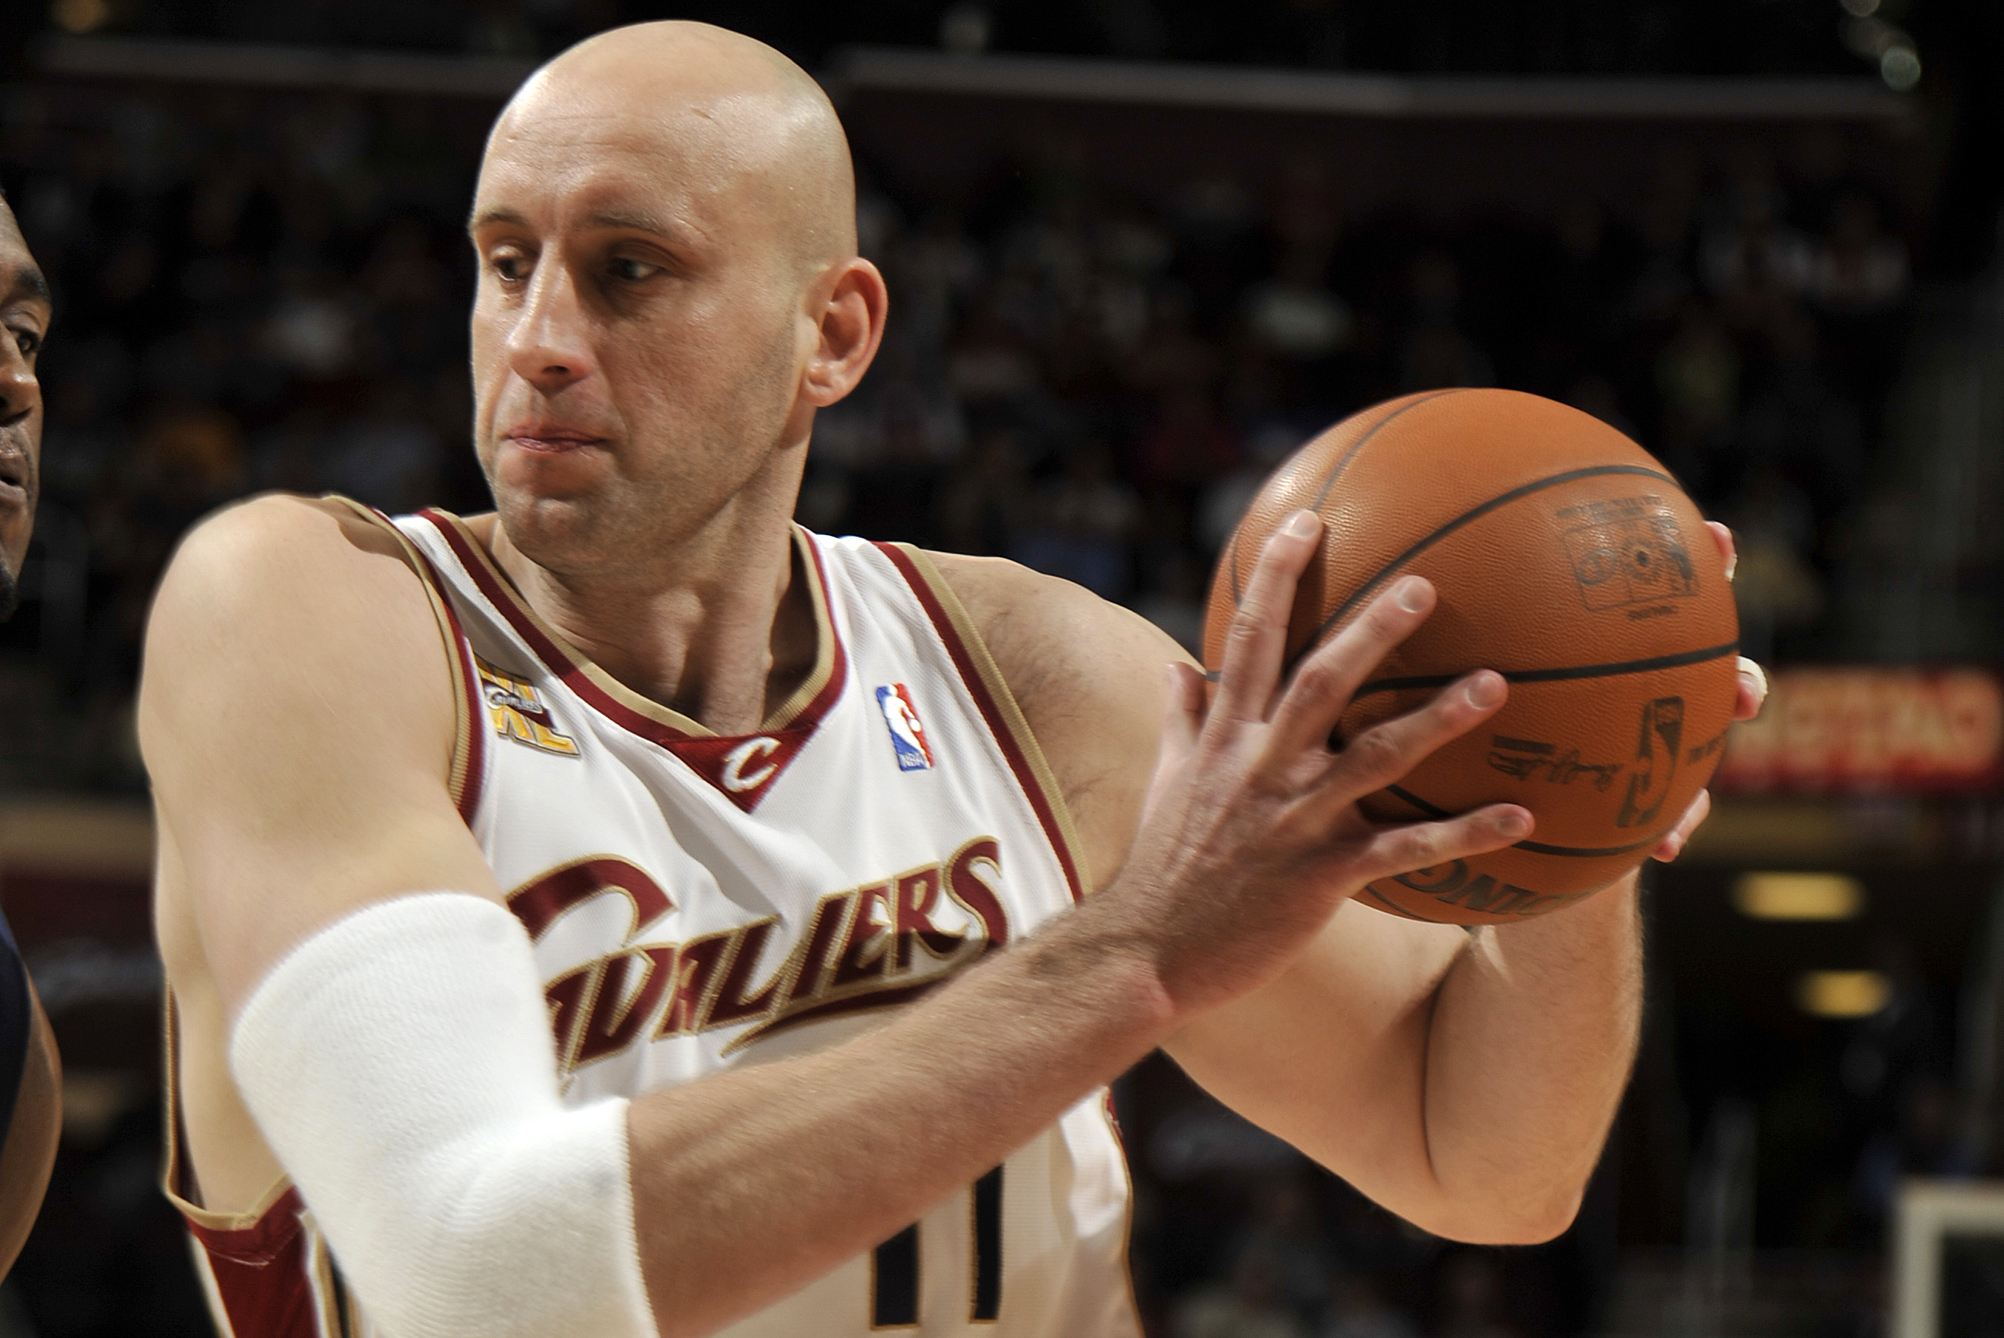 Zydrunas Ilgauskas to have jersey retired by Cleveland Cavaliers